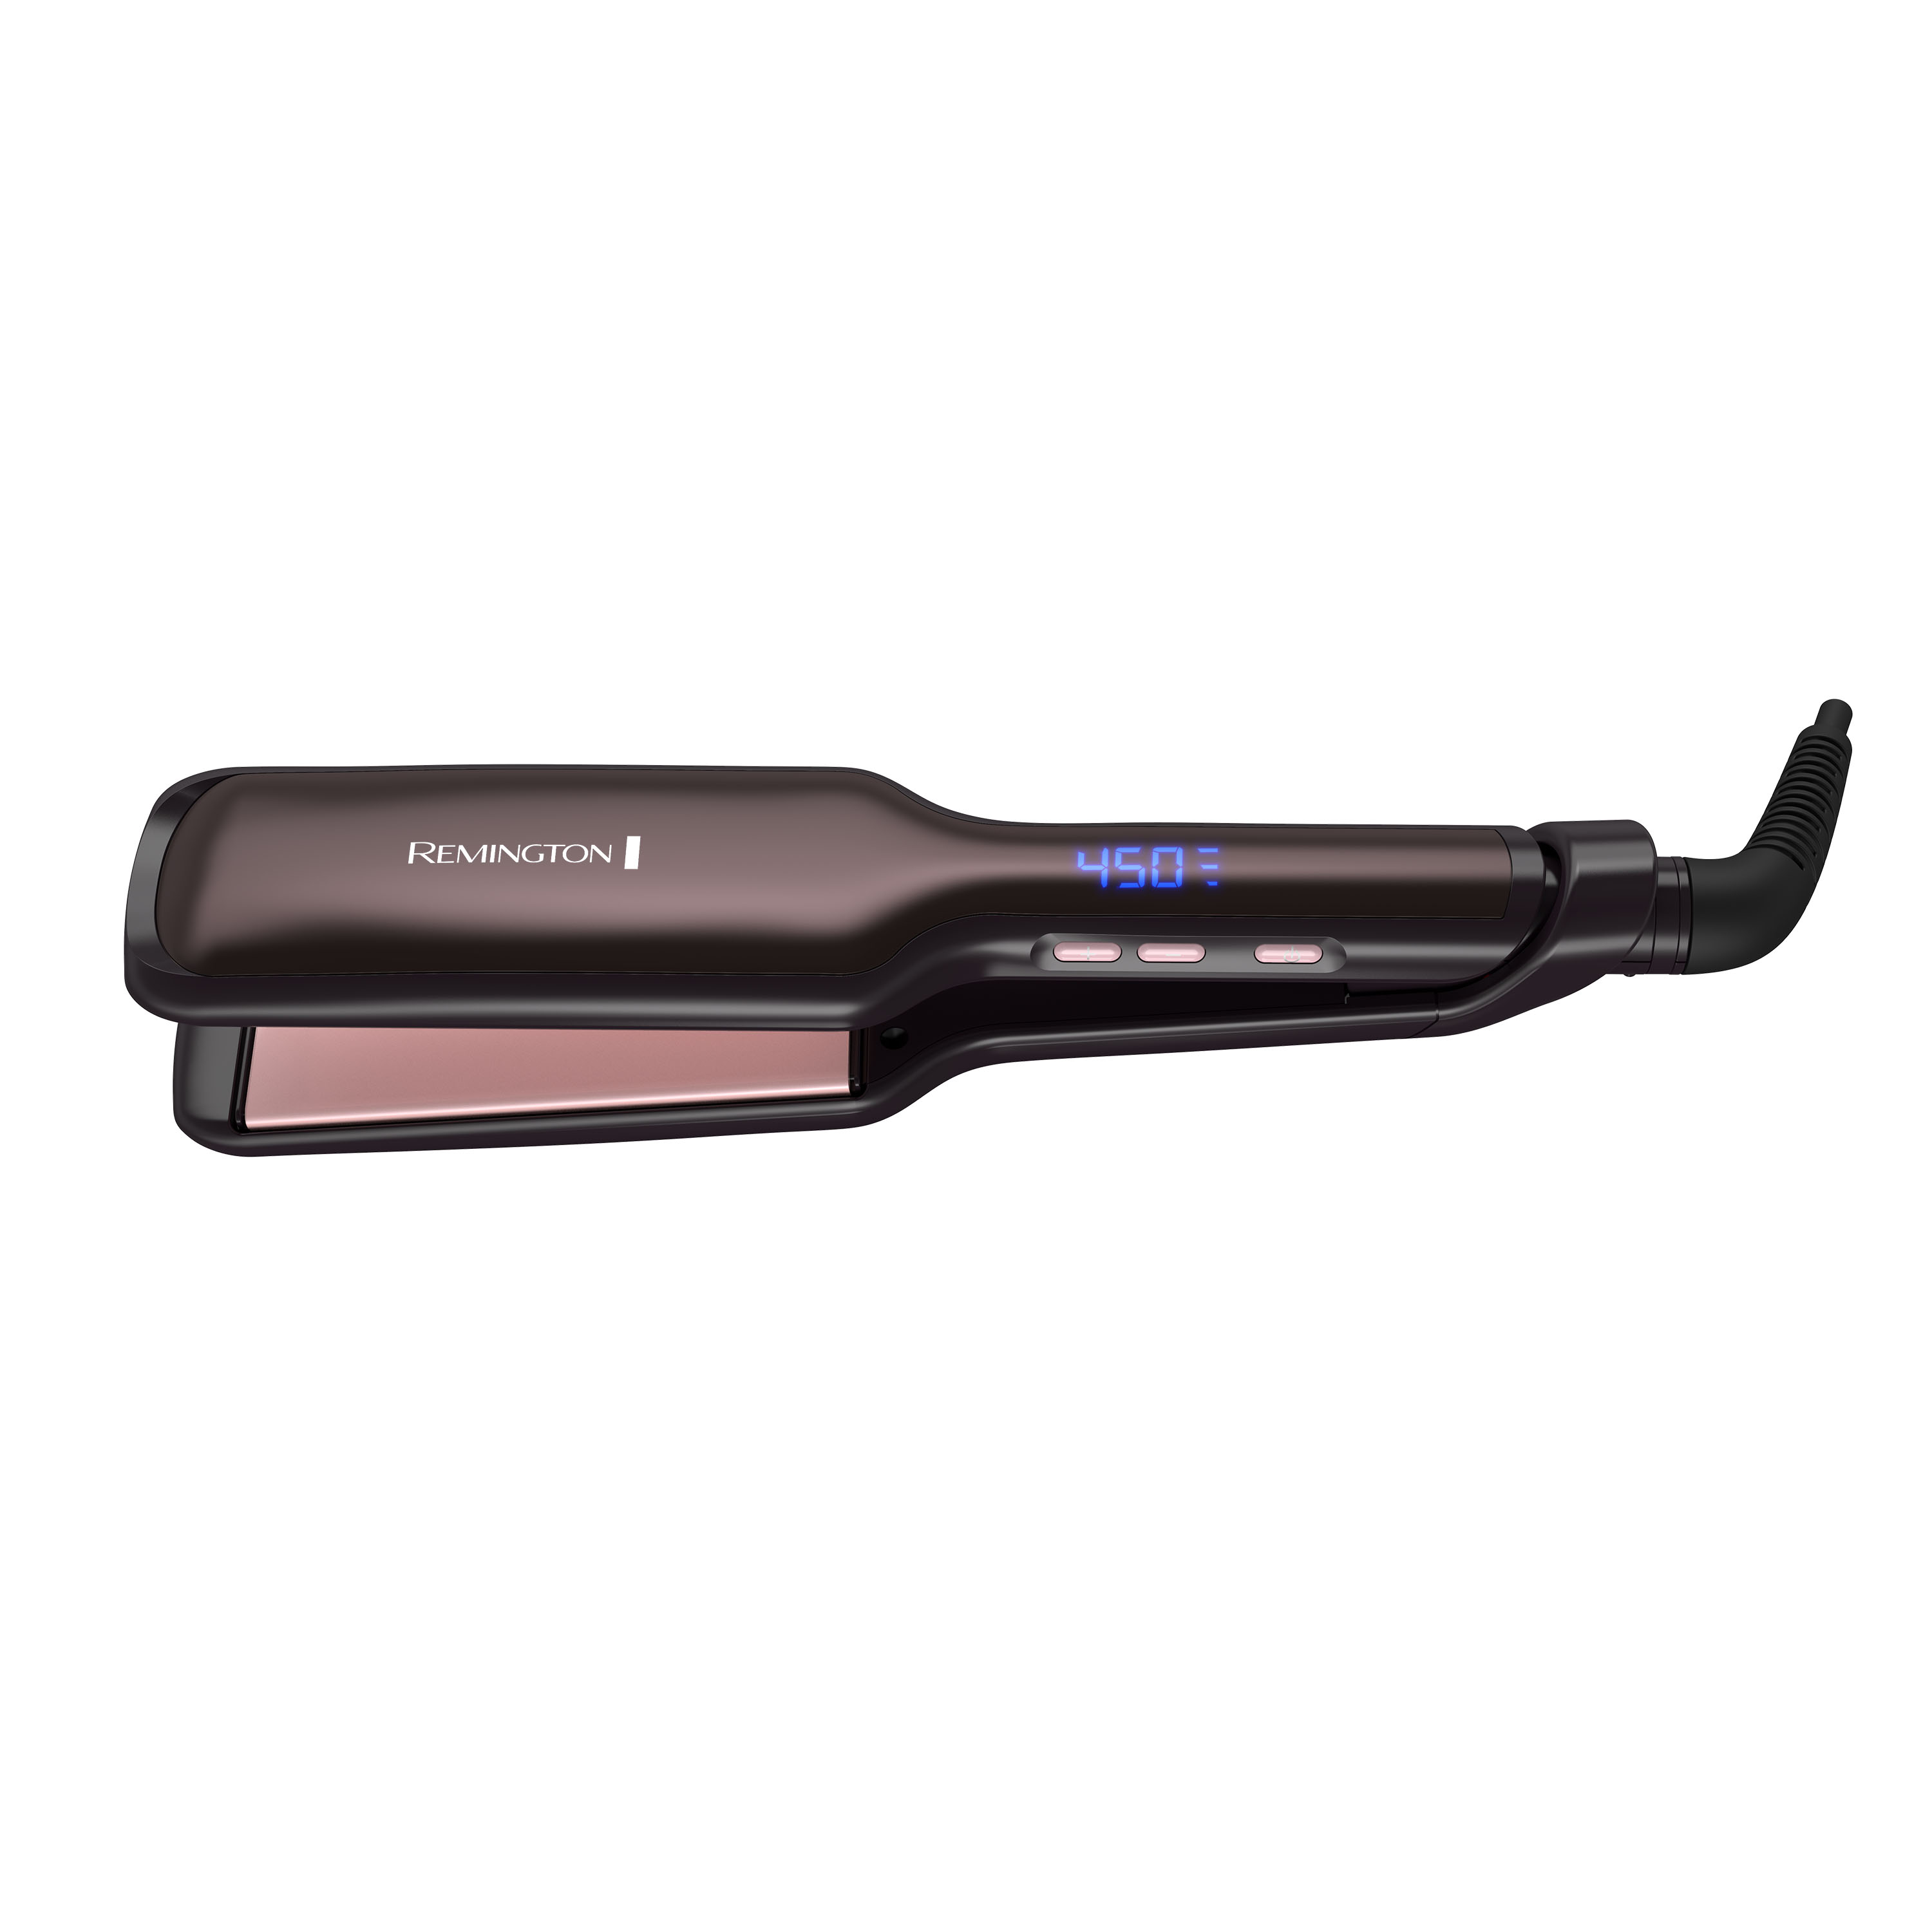 Remington Pro Soft Touch Finish and Digital Controls Professional 2" Pearl Ceramic Flat Iron Hair Straightener, Black - image 12 of 15